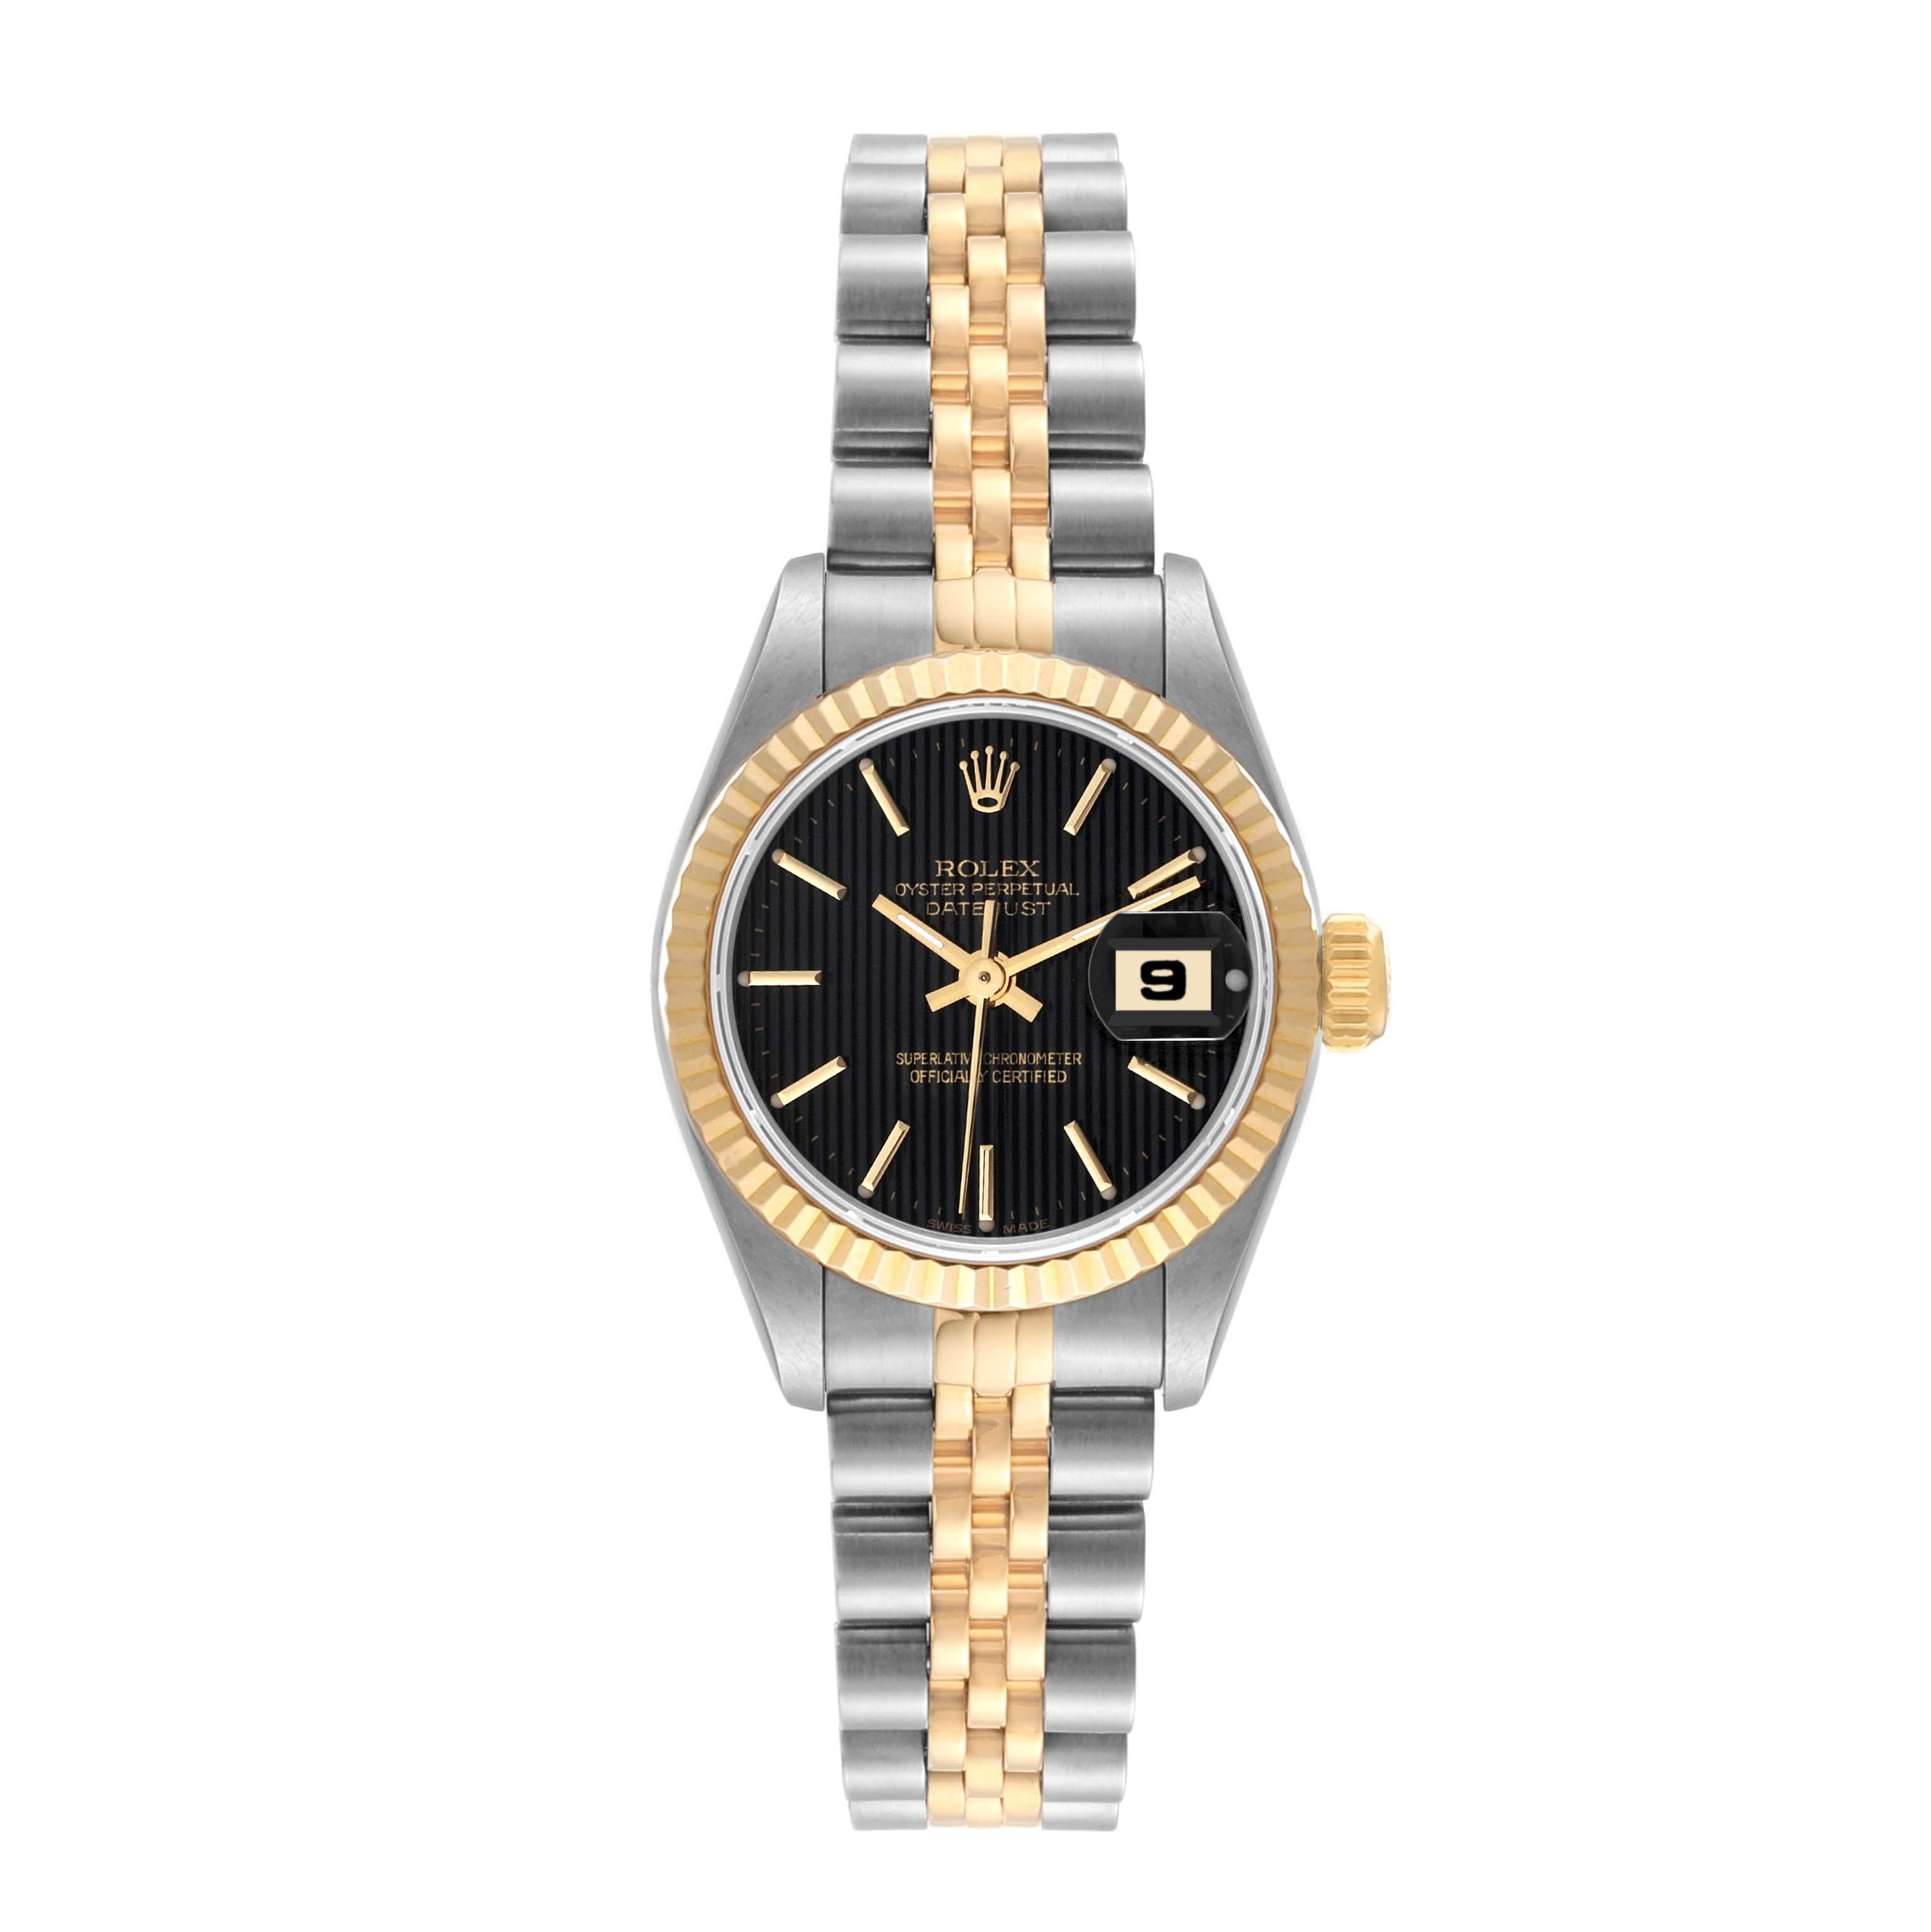 Rolex Datejust Steel Yellow Gold Black Tapestry Dial Ladies Watch 69173. Officially certified chronometer automatic self-winding movement. Stainless steel oyster case 26.0 mm in diameter. Rolex logo on the crown. 18k yellow gold fluted bezel.